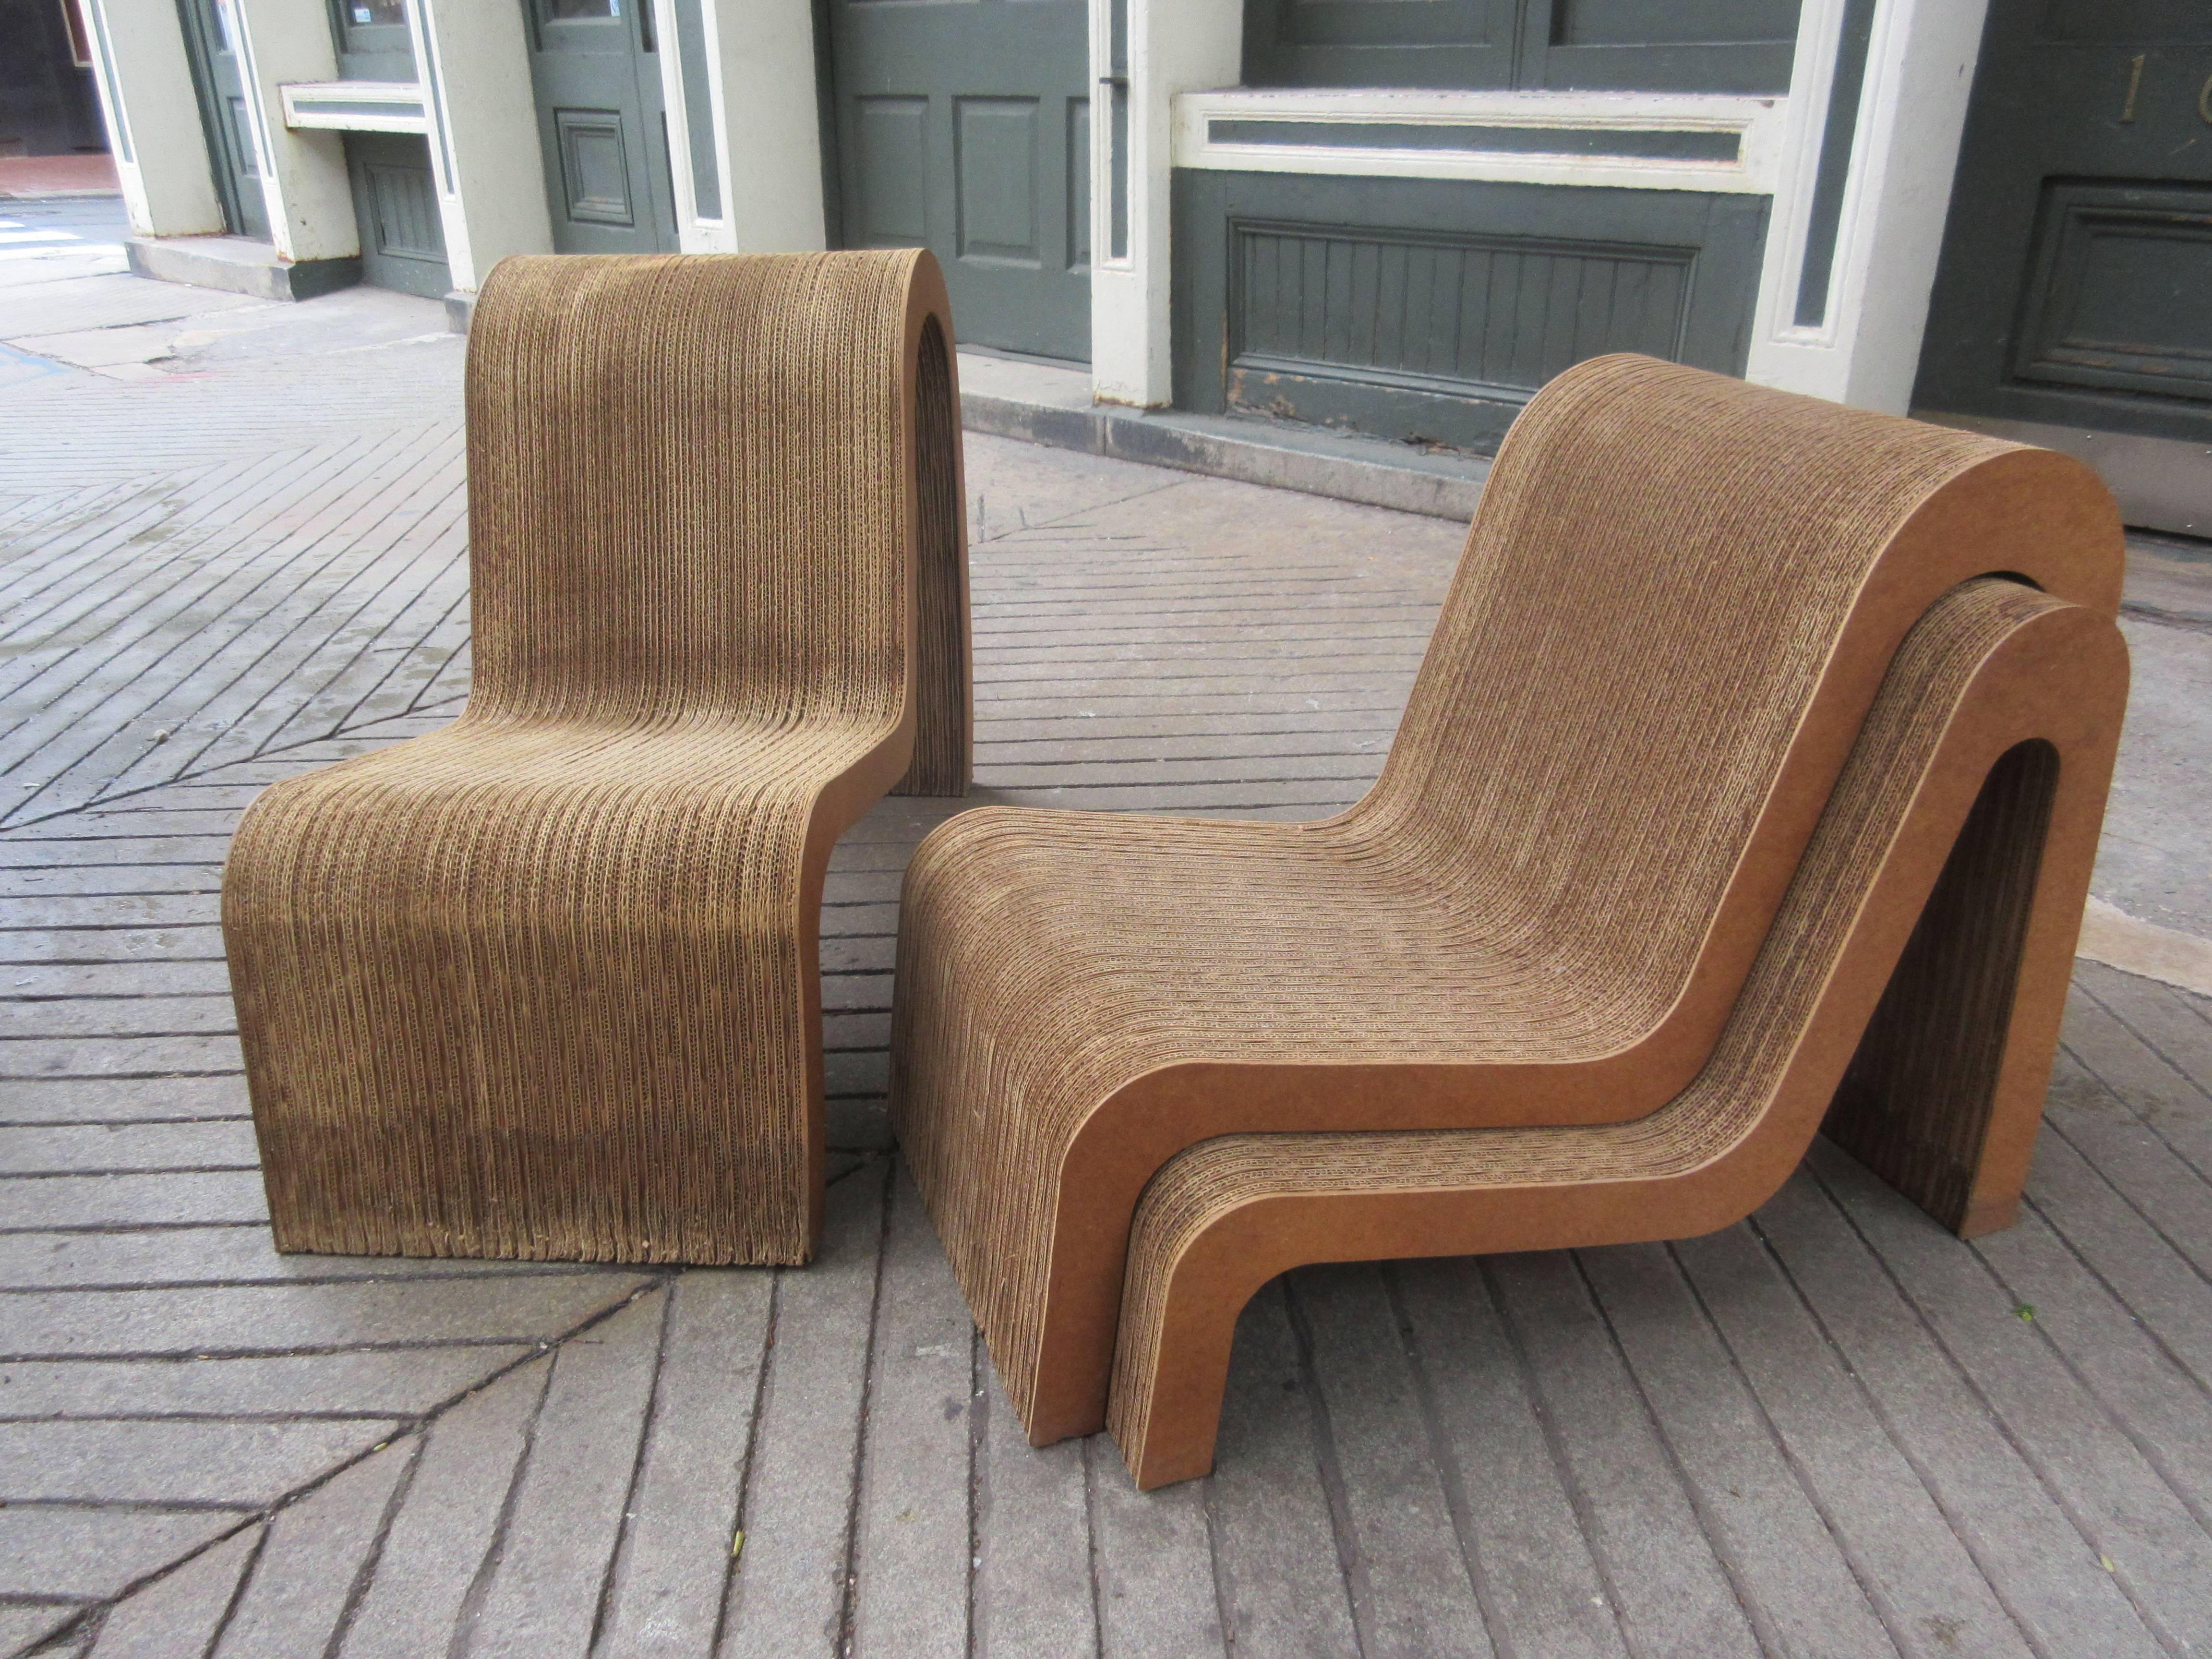 Seldom seen easy edges nesting chair set! Three individual chairs that stack neatly into one unit. Innovative use of materials were the hallmark of this early 1970s design from Architect Frank Gehry. Chairs show a little water damage towards